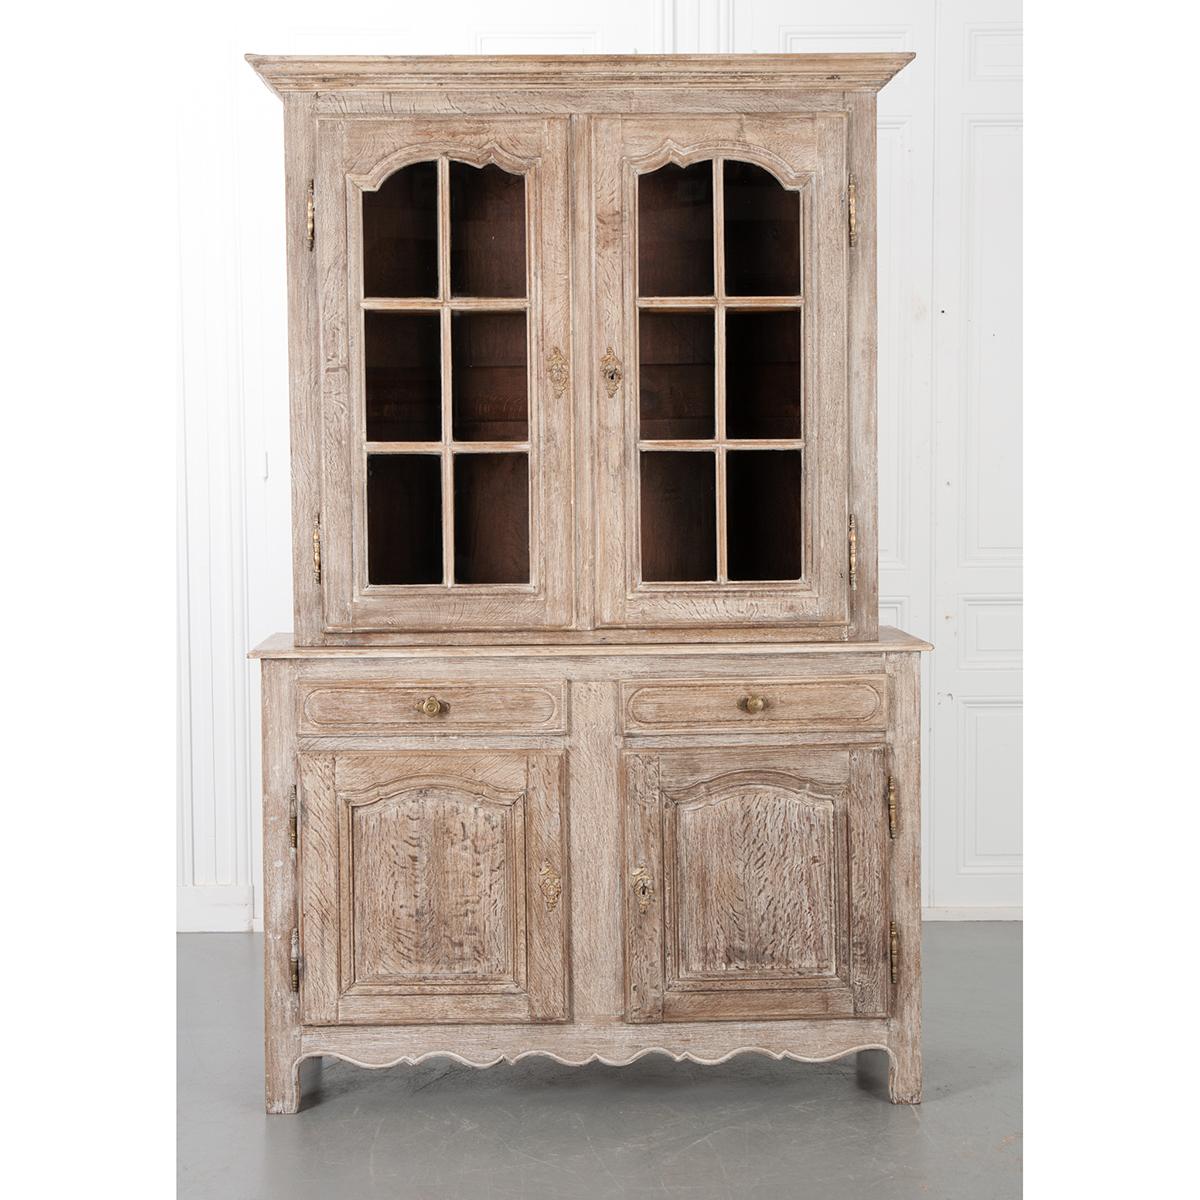 This exquisite French buffet a Deux Corps provides plenty of storage space! Made of oak and given a pickle finish, you can see the stunning grain of the wood throughout. Four matching brass Escutcheons are original and depict a peacock and floral